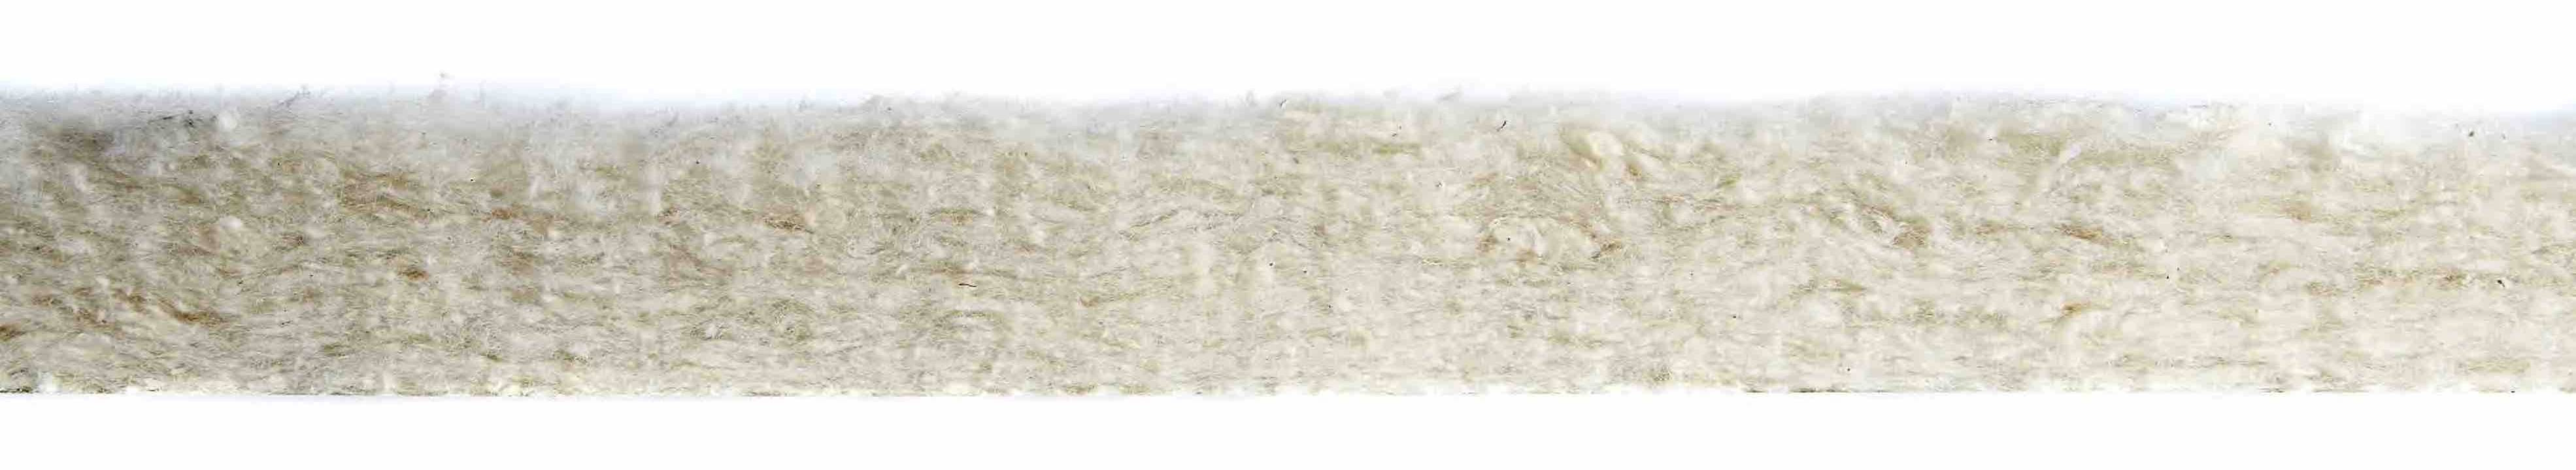 Bonded wool and cotton cross section